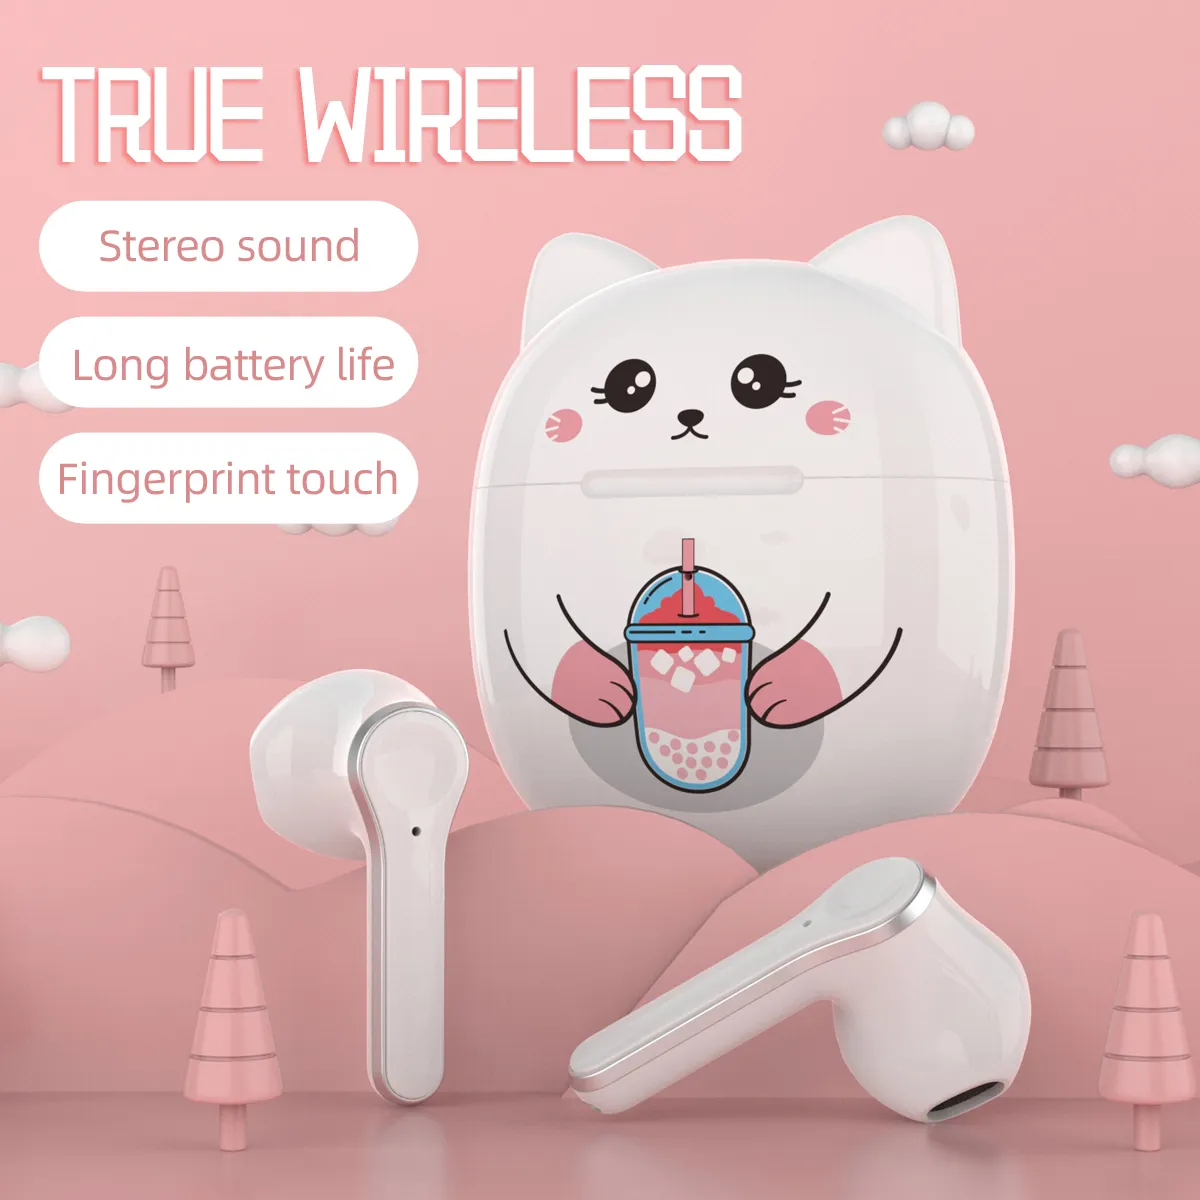 T18a wireless Bluetooth headset cute cat two ear music earplug earpiece with charging case headphone suit for smartphone cellphone girls headphones